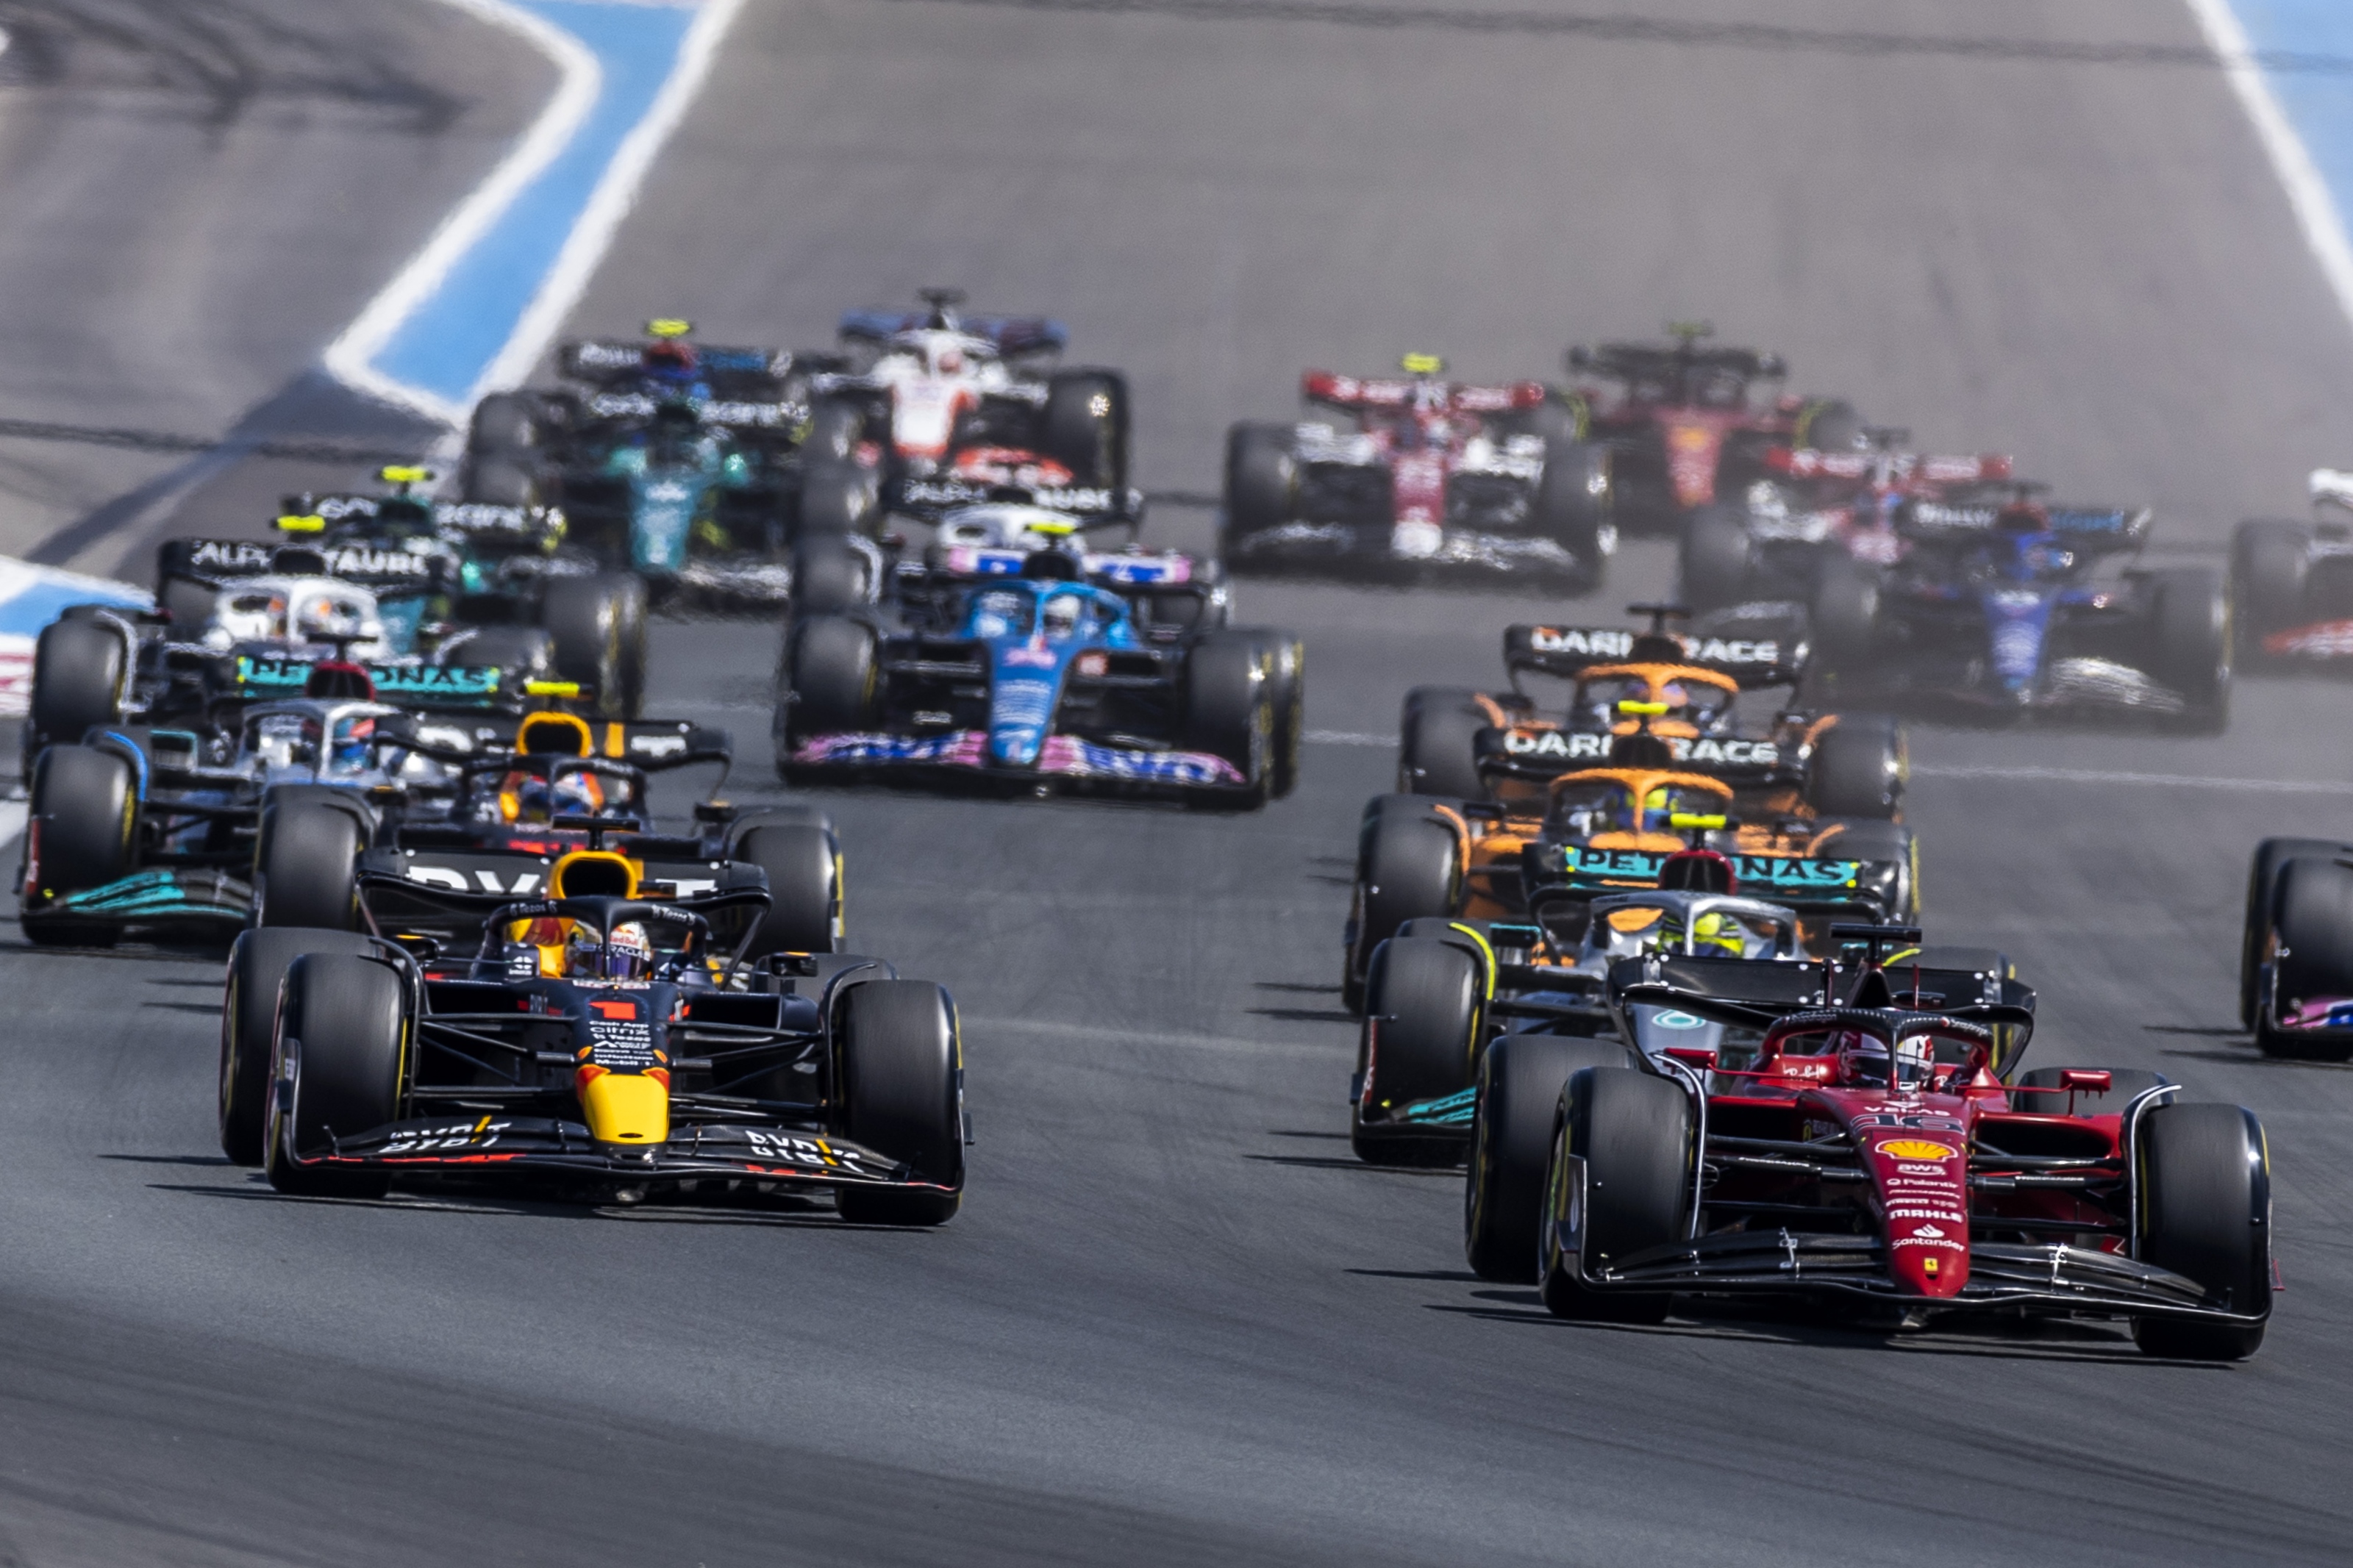 Formula 1 One race has been removed from the schedule